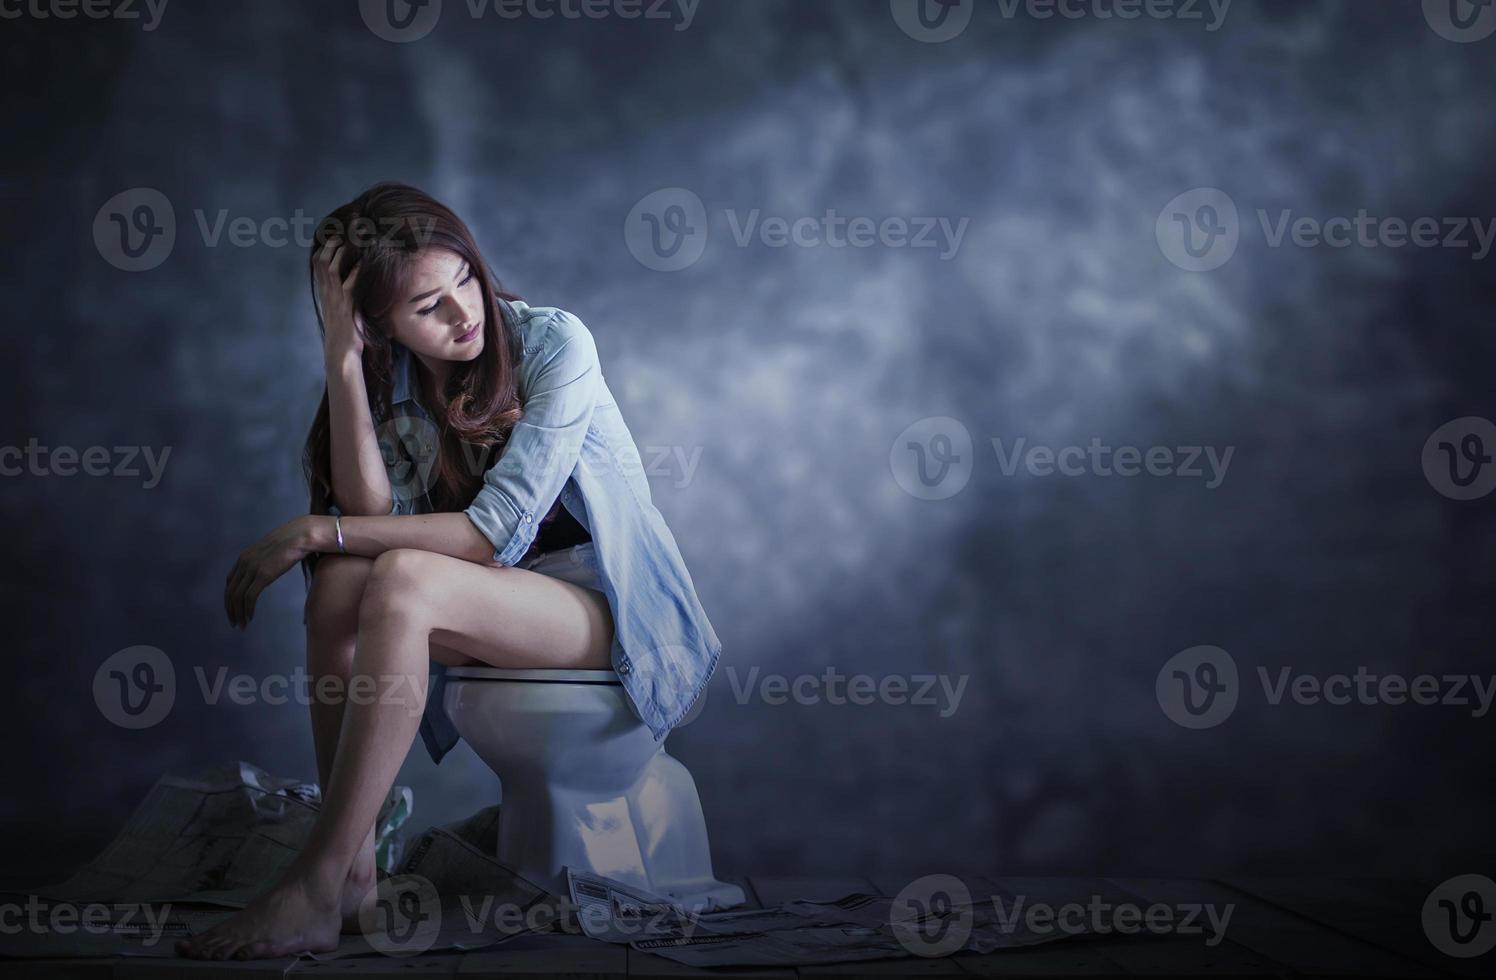 Profile Of Sad Woman With Long Hair In Tears, Depression Concept Artwork  Stock Photo, Picture and Royalty Free Image. Image 86214640.